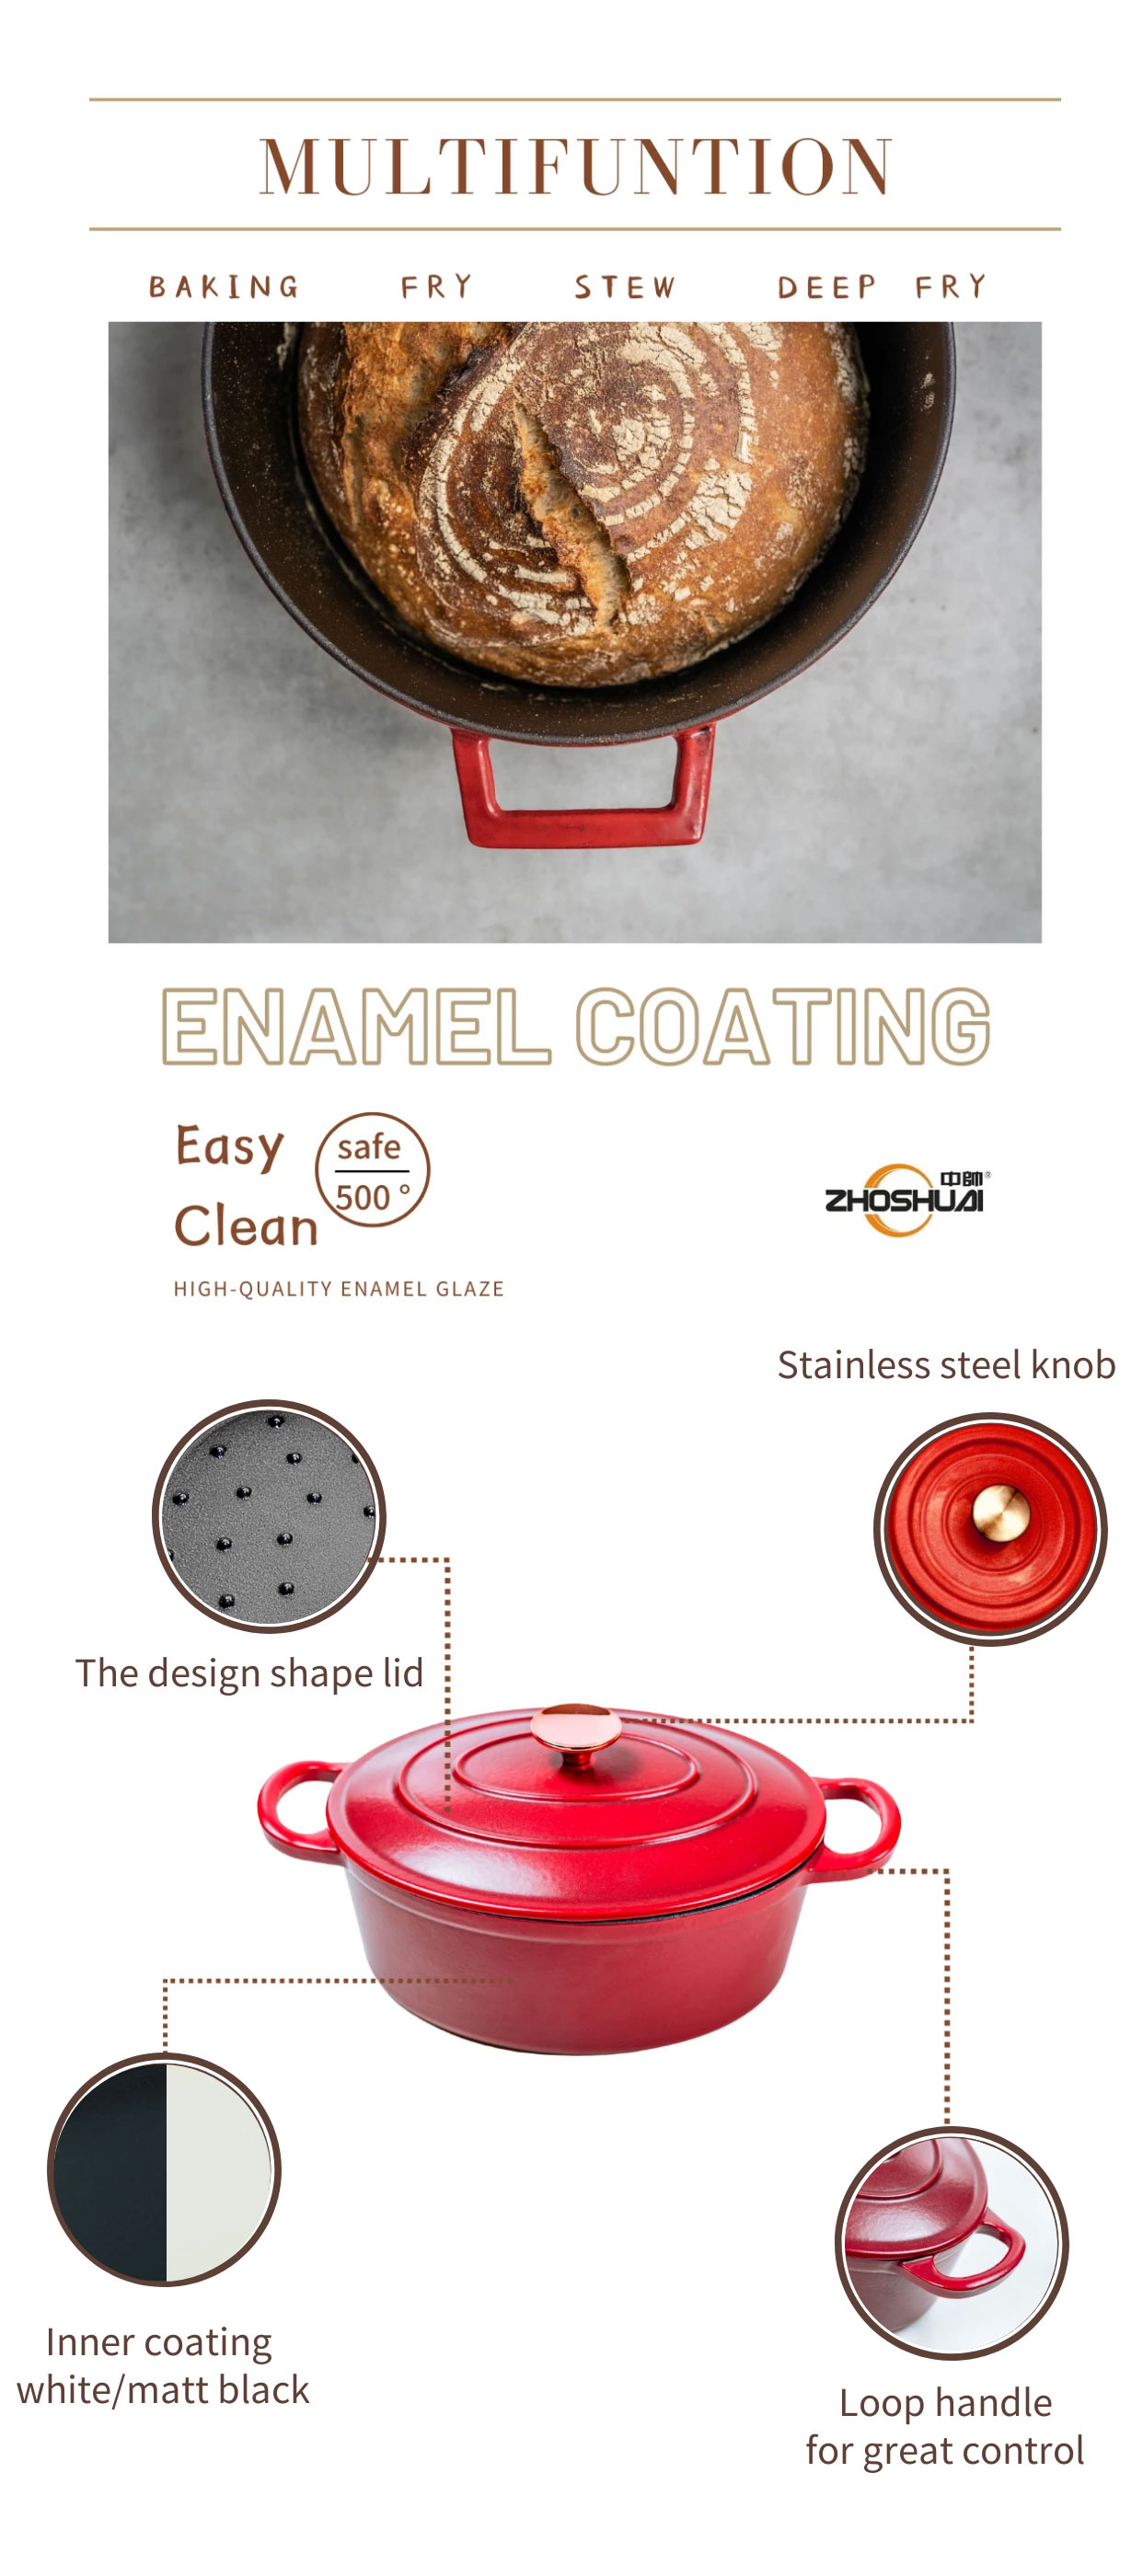 wine-red-enamel-coating-cast-iron-casserole-for-stewing